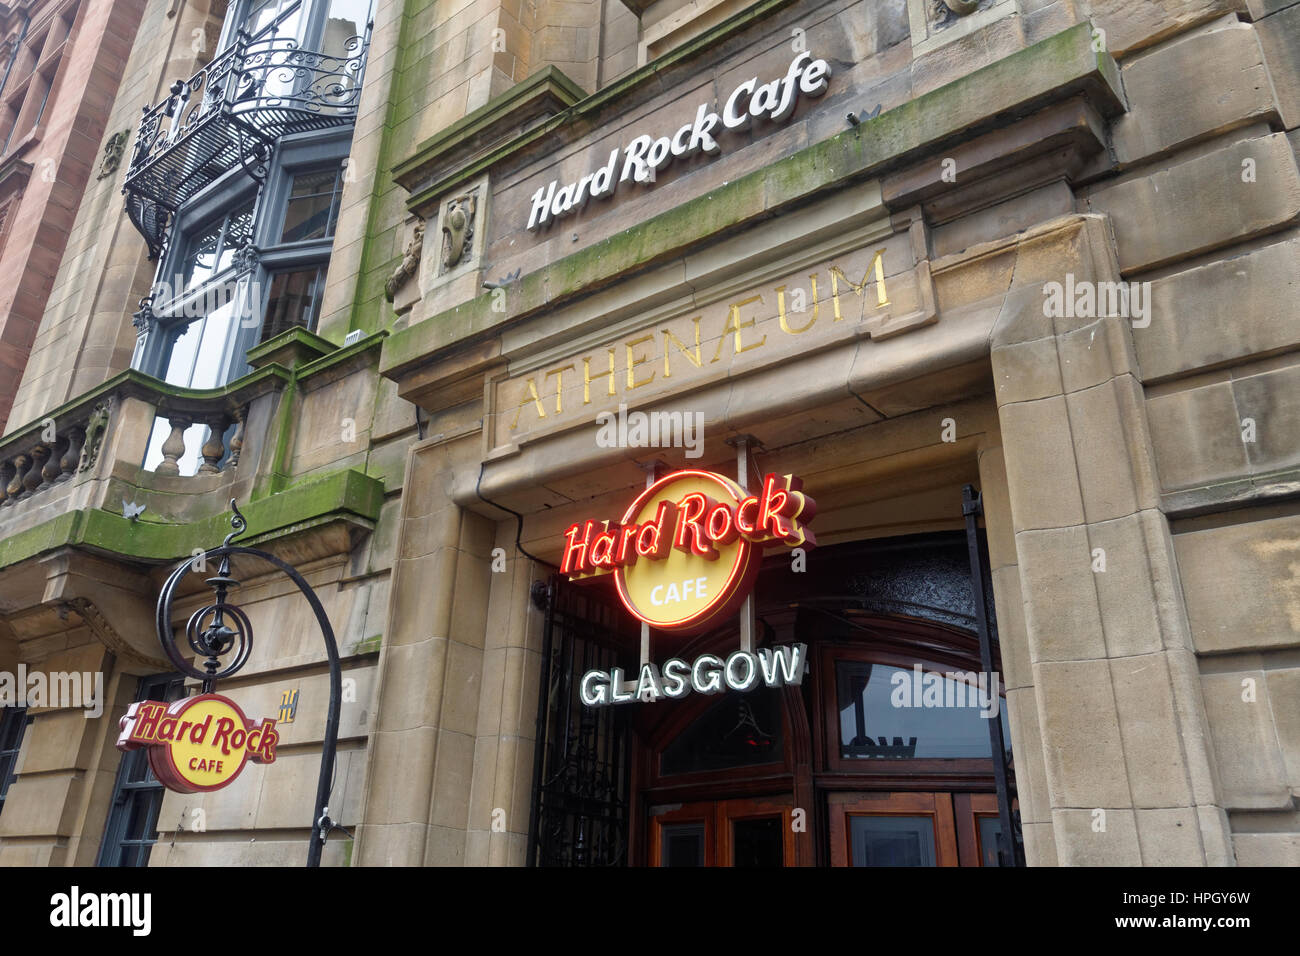 hard rock cafe Glasgow neon sign building Stock Photo